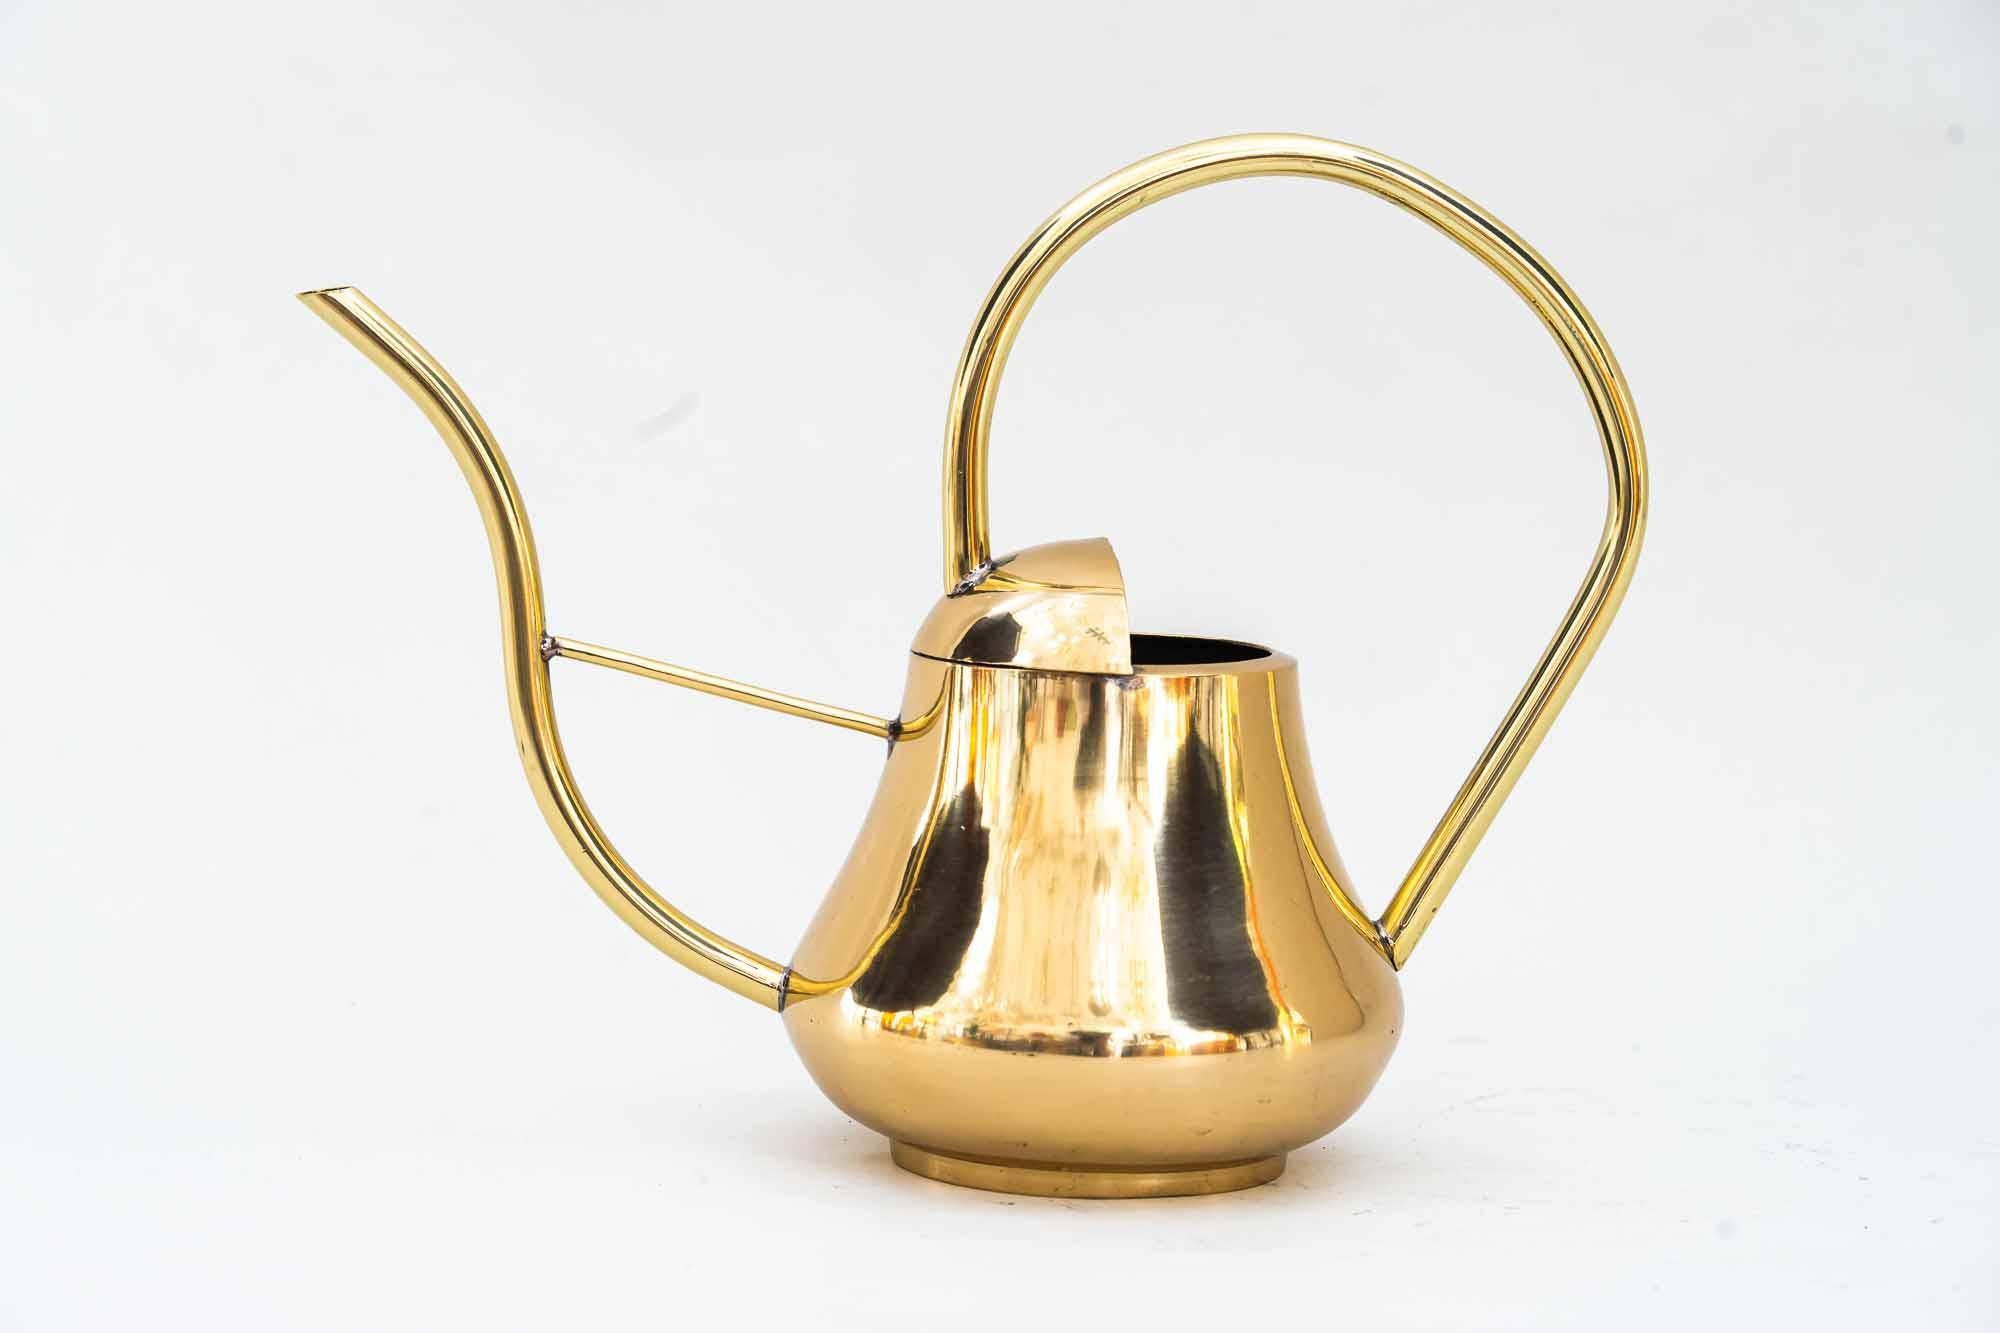 Brass watering can vienna around 1960s
Polished and stove enameled.